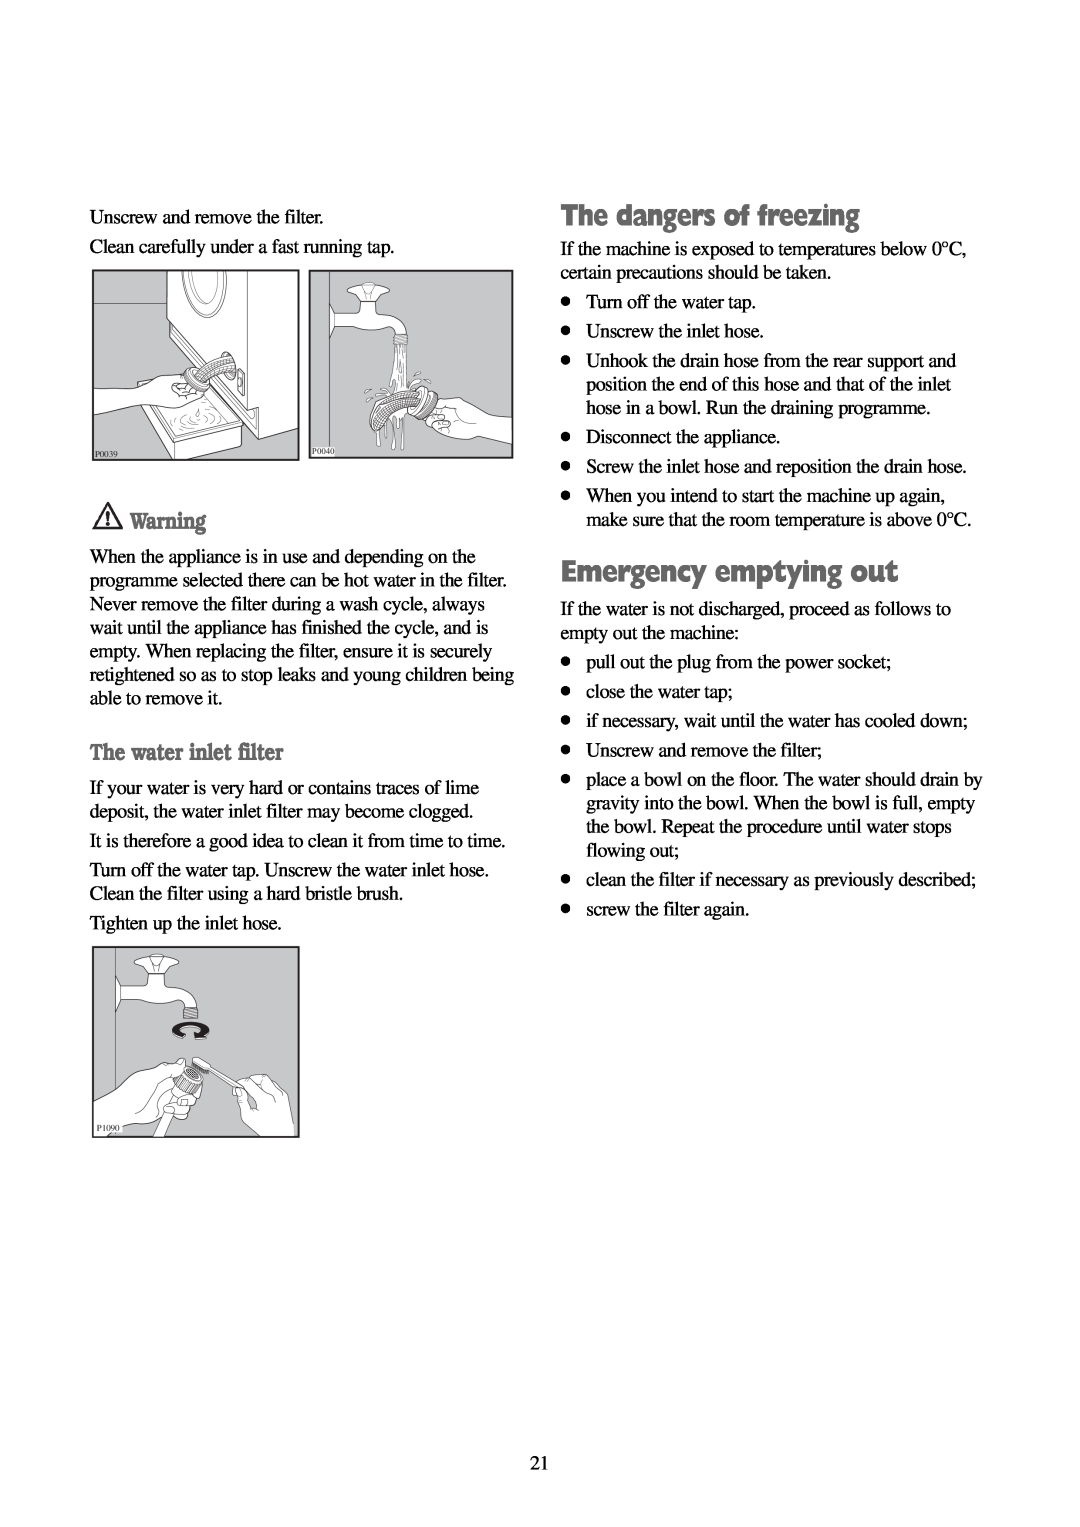 Electrolux EWD 1419 I manual The dangers of freezing, Emergency emptying out, The water inlet filter 